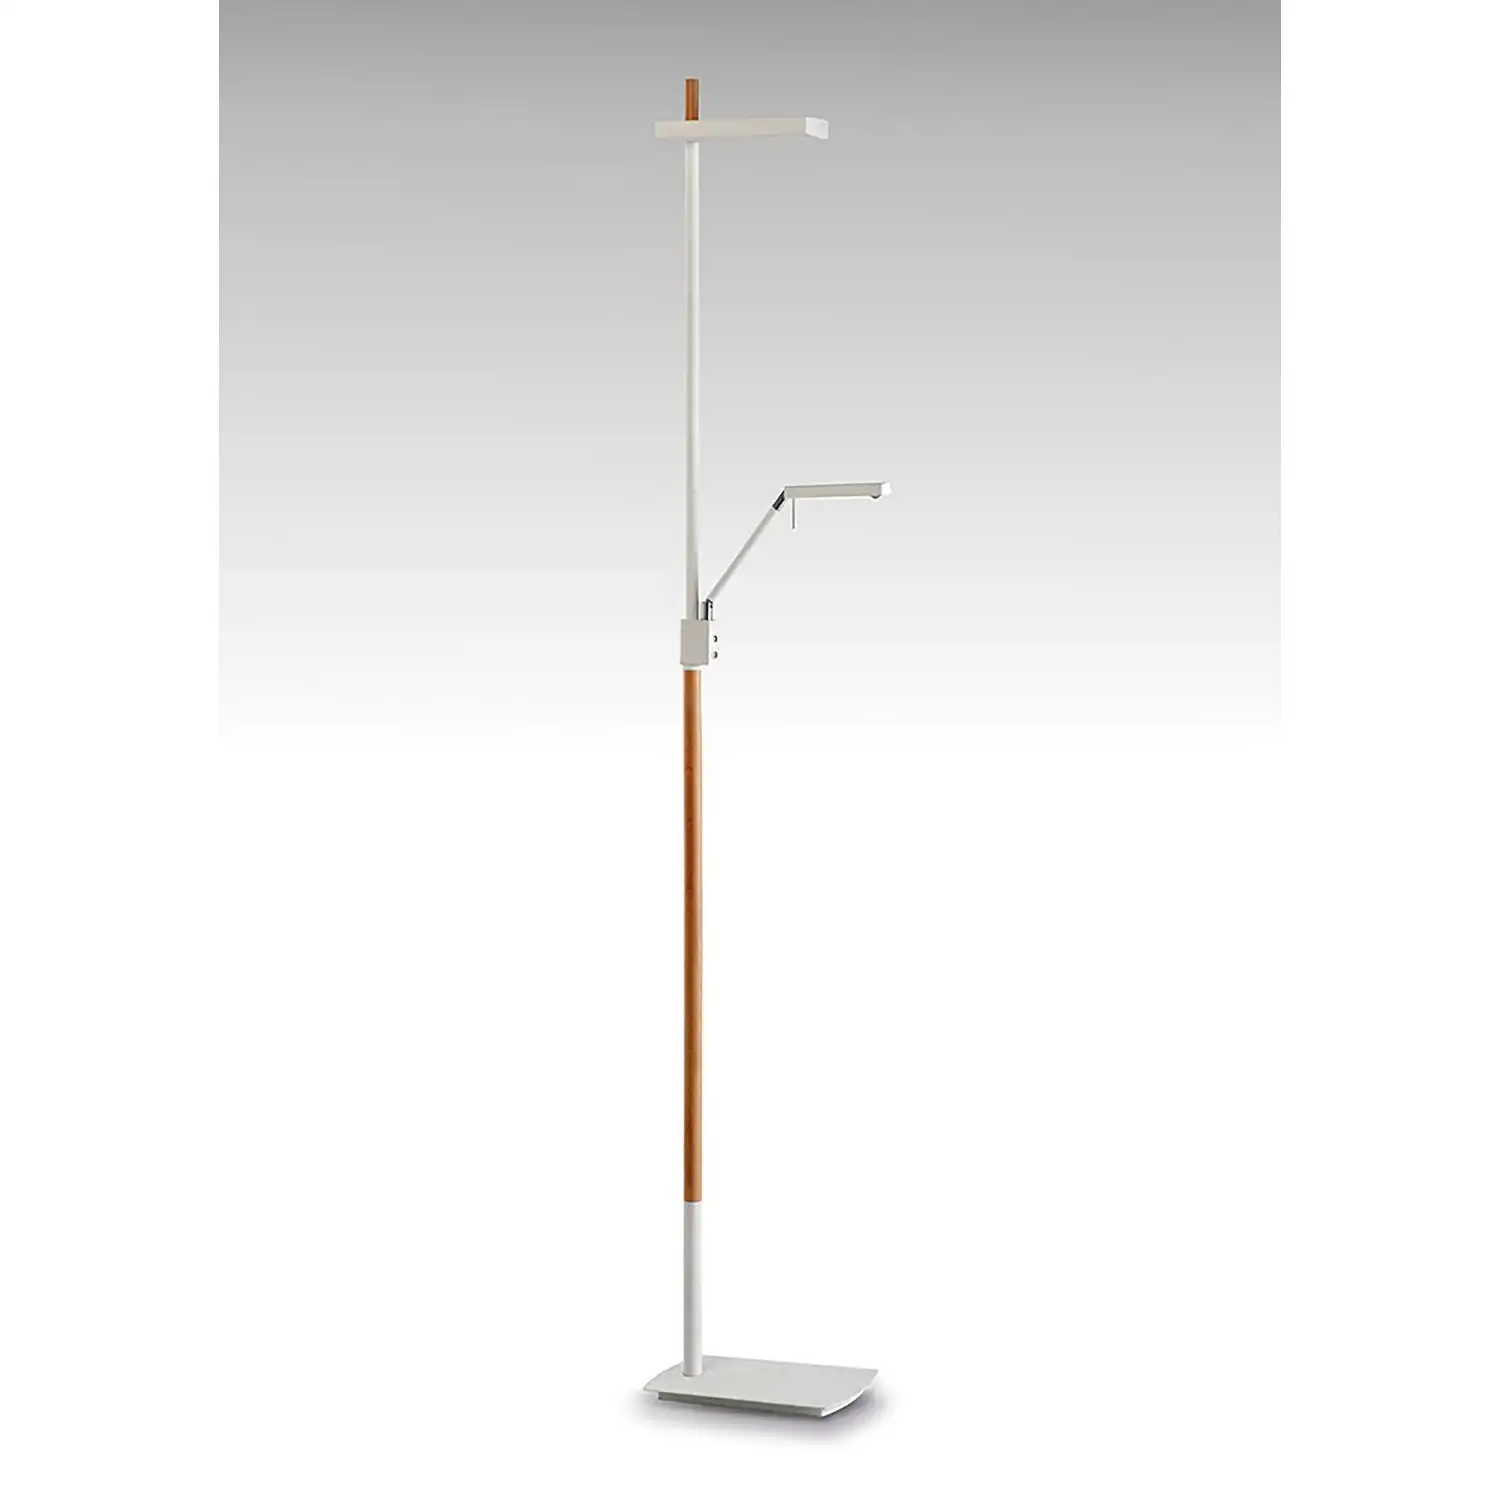 Phuket Floor Lamp 2 Light 21W Down 7W Up LED 3000K, 3000lm, Touch Dimmer, Matt White Beech, 3yrs Warranty ITEM IS COLLECTION ONLY